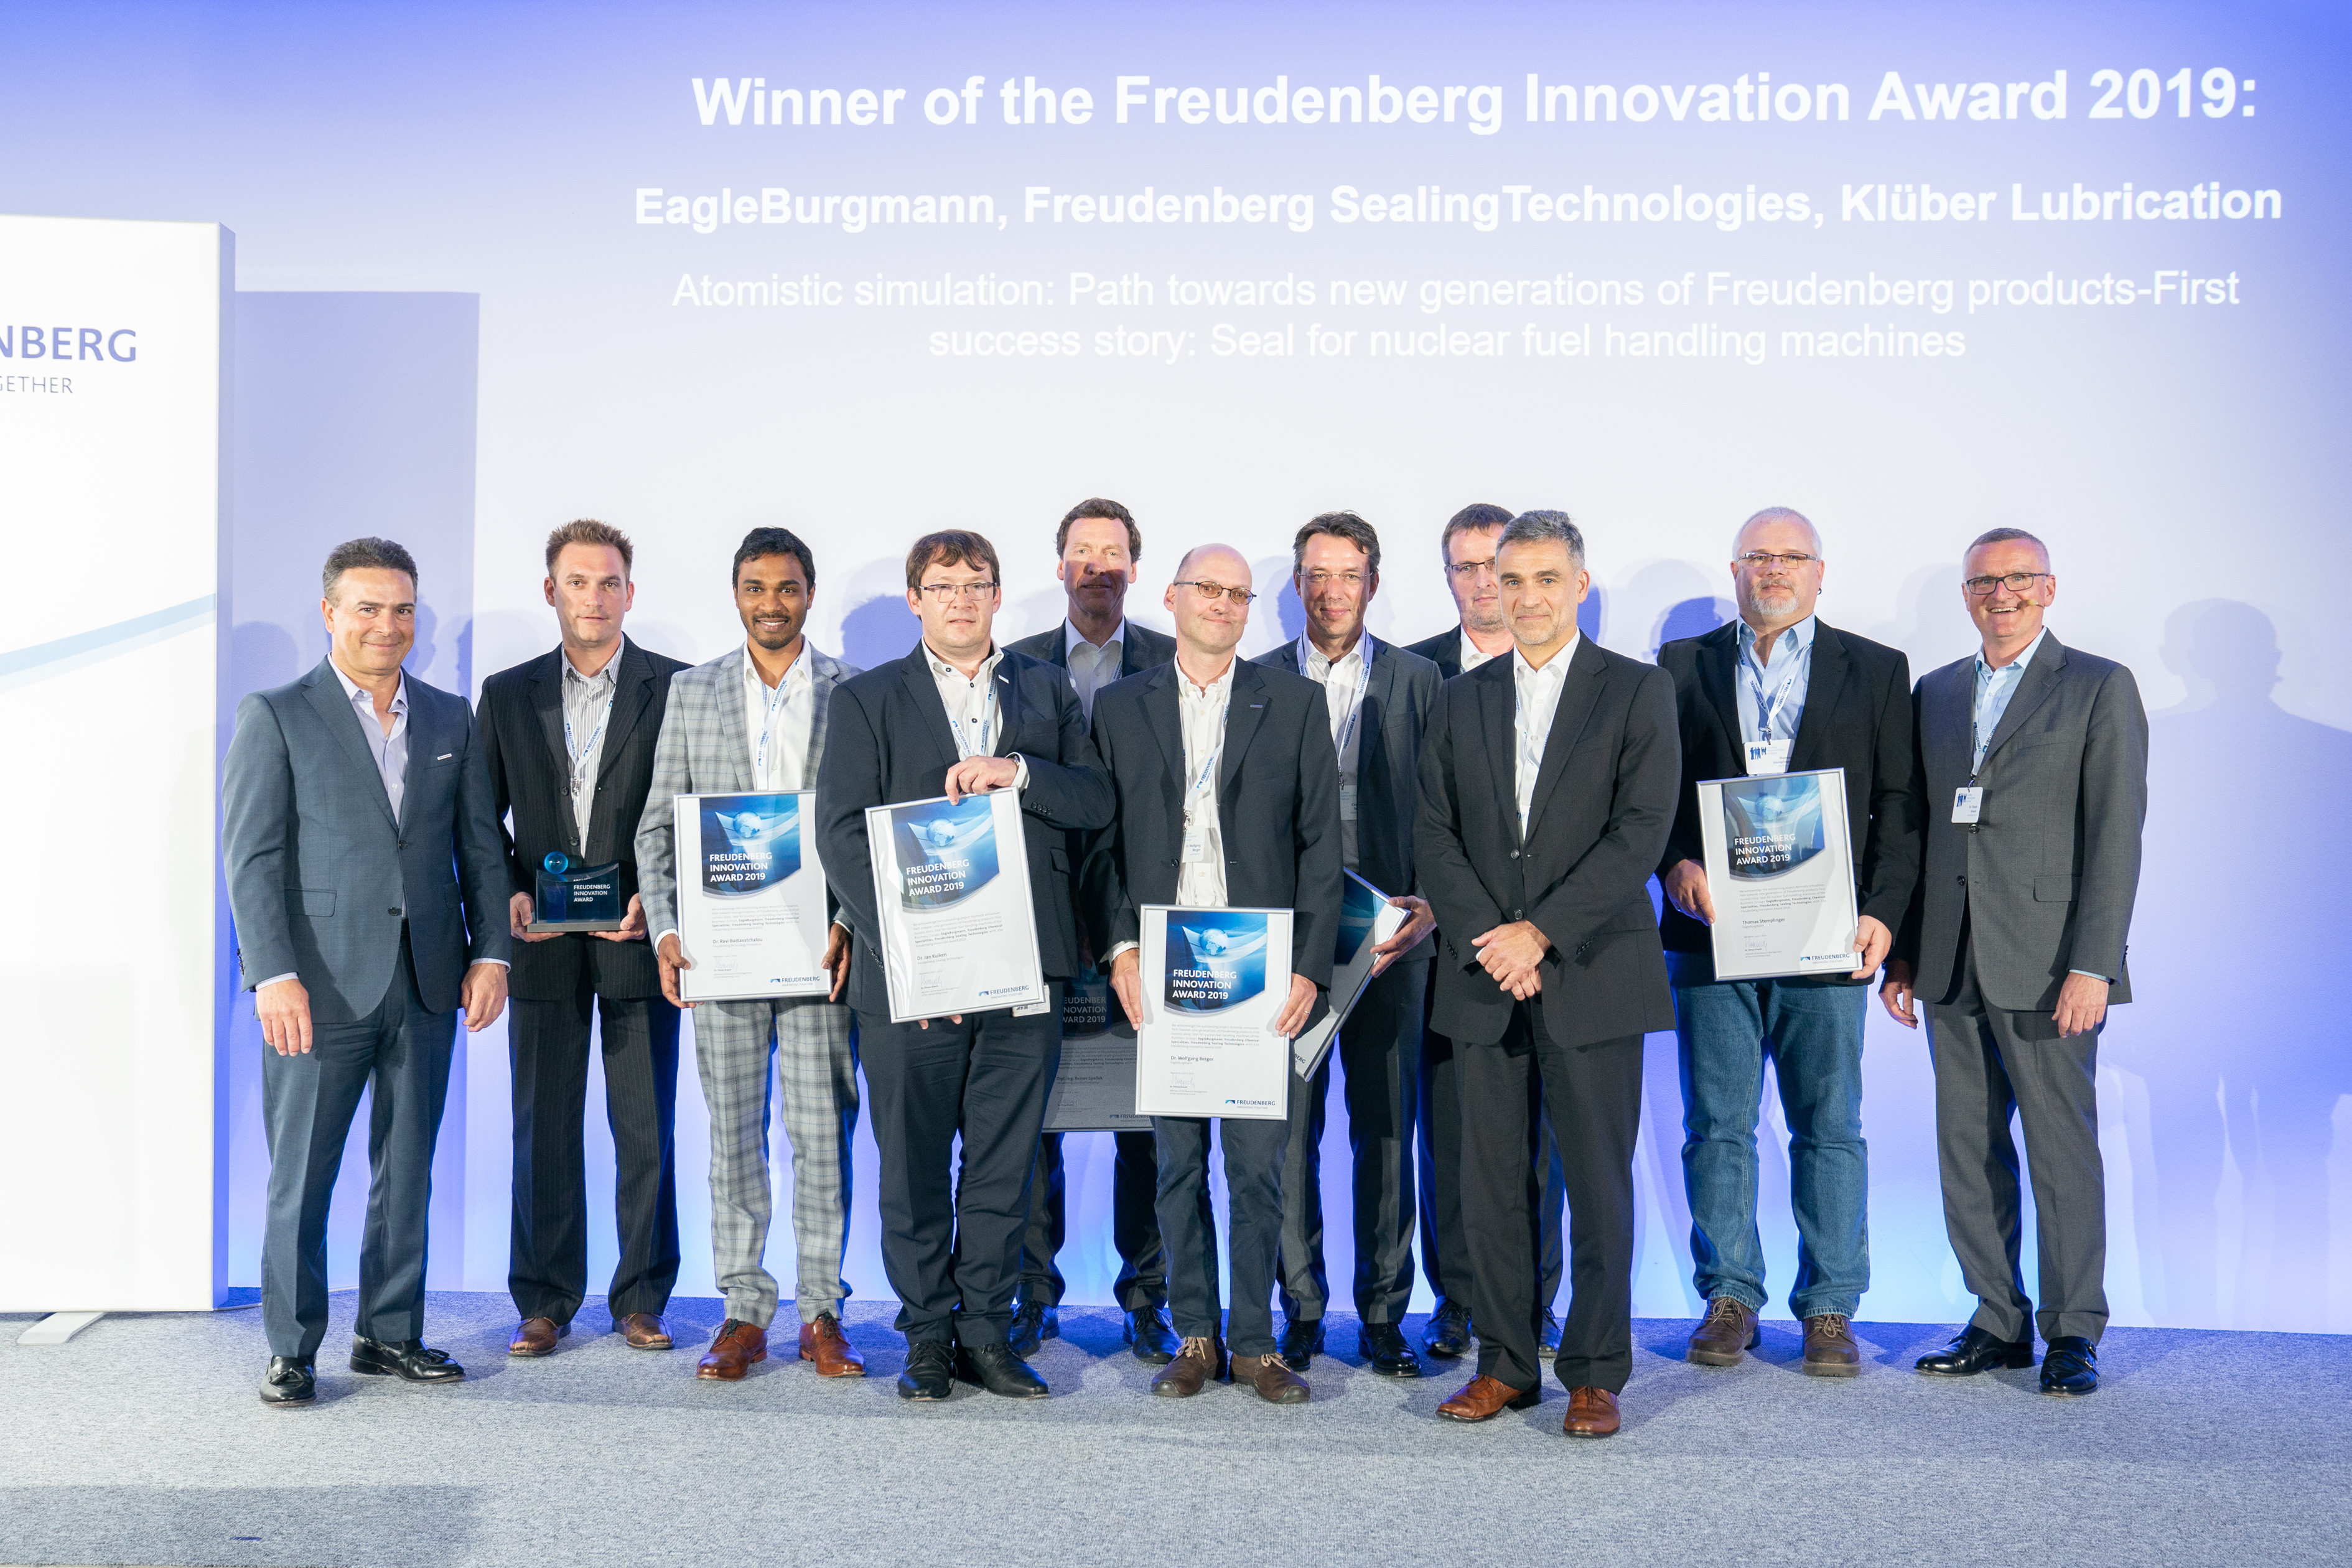 Dr. Mohsen Sohi (far left), CEO of the Freudenberg Group, and Dr. Tilman Krauch (far right), CTO of the Freudenberg Group, presented the Freudenberg Innovation Award to the "Atomistic Simulations" project from the Freudenberg Technology Innovation, Freudenberg Sealing Technologies, EagleBurgmann and Klüber Lubrication business areas.